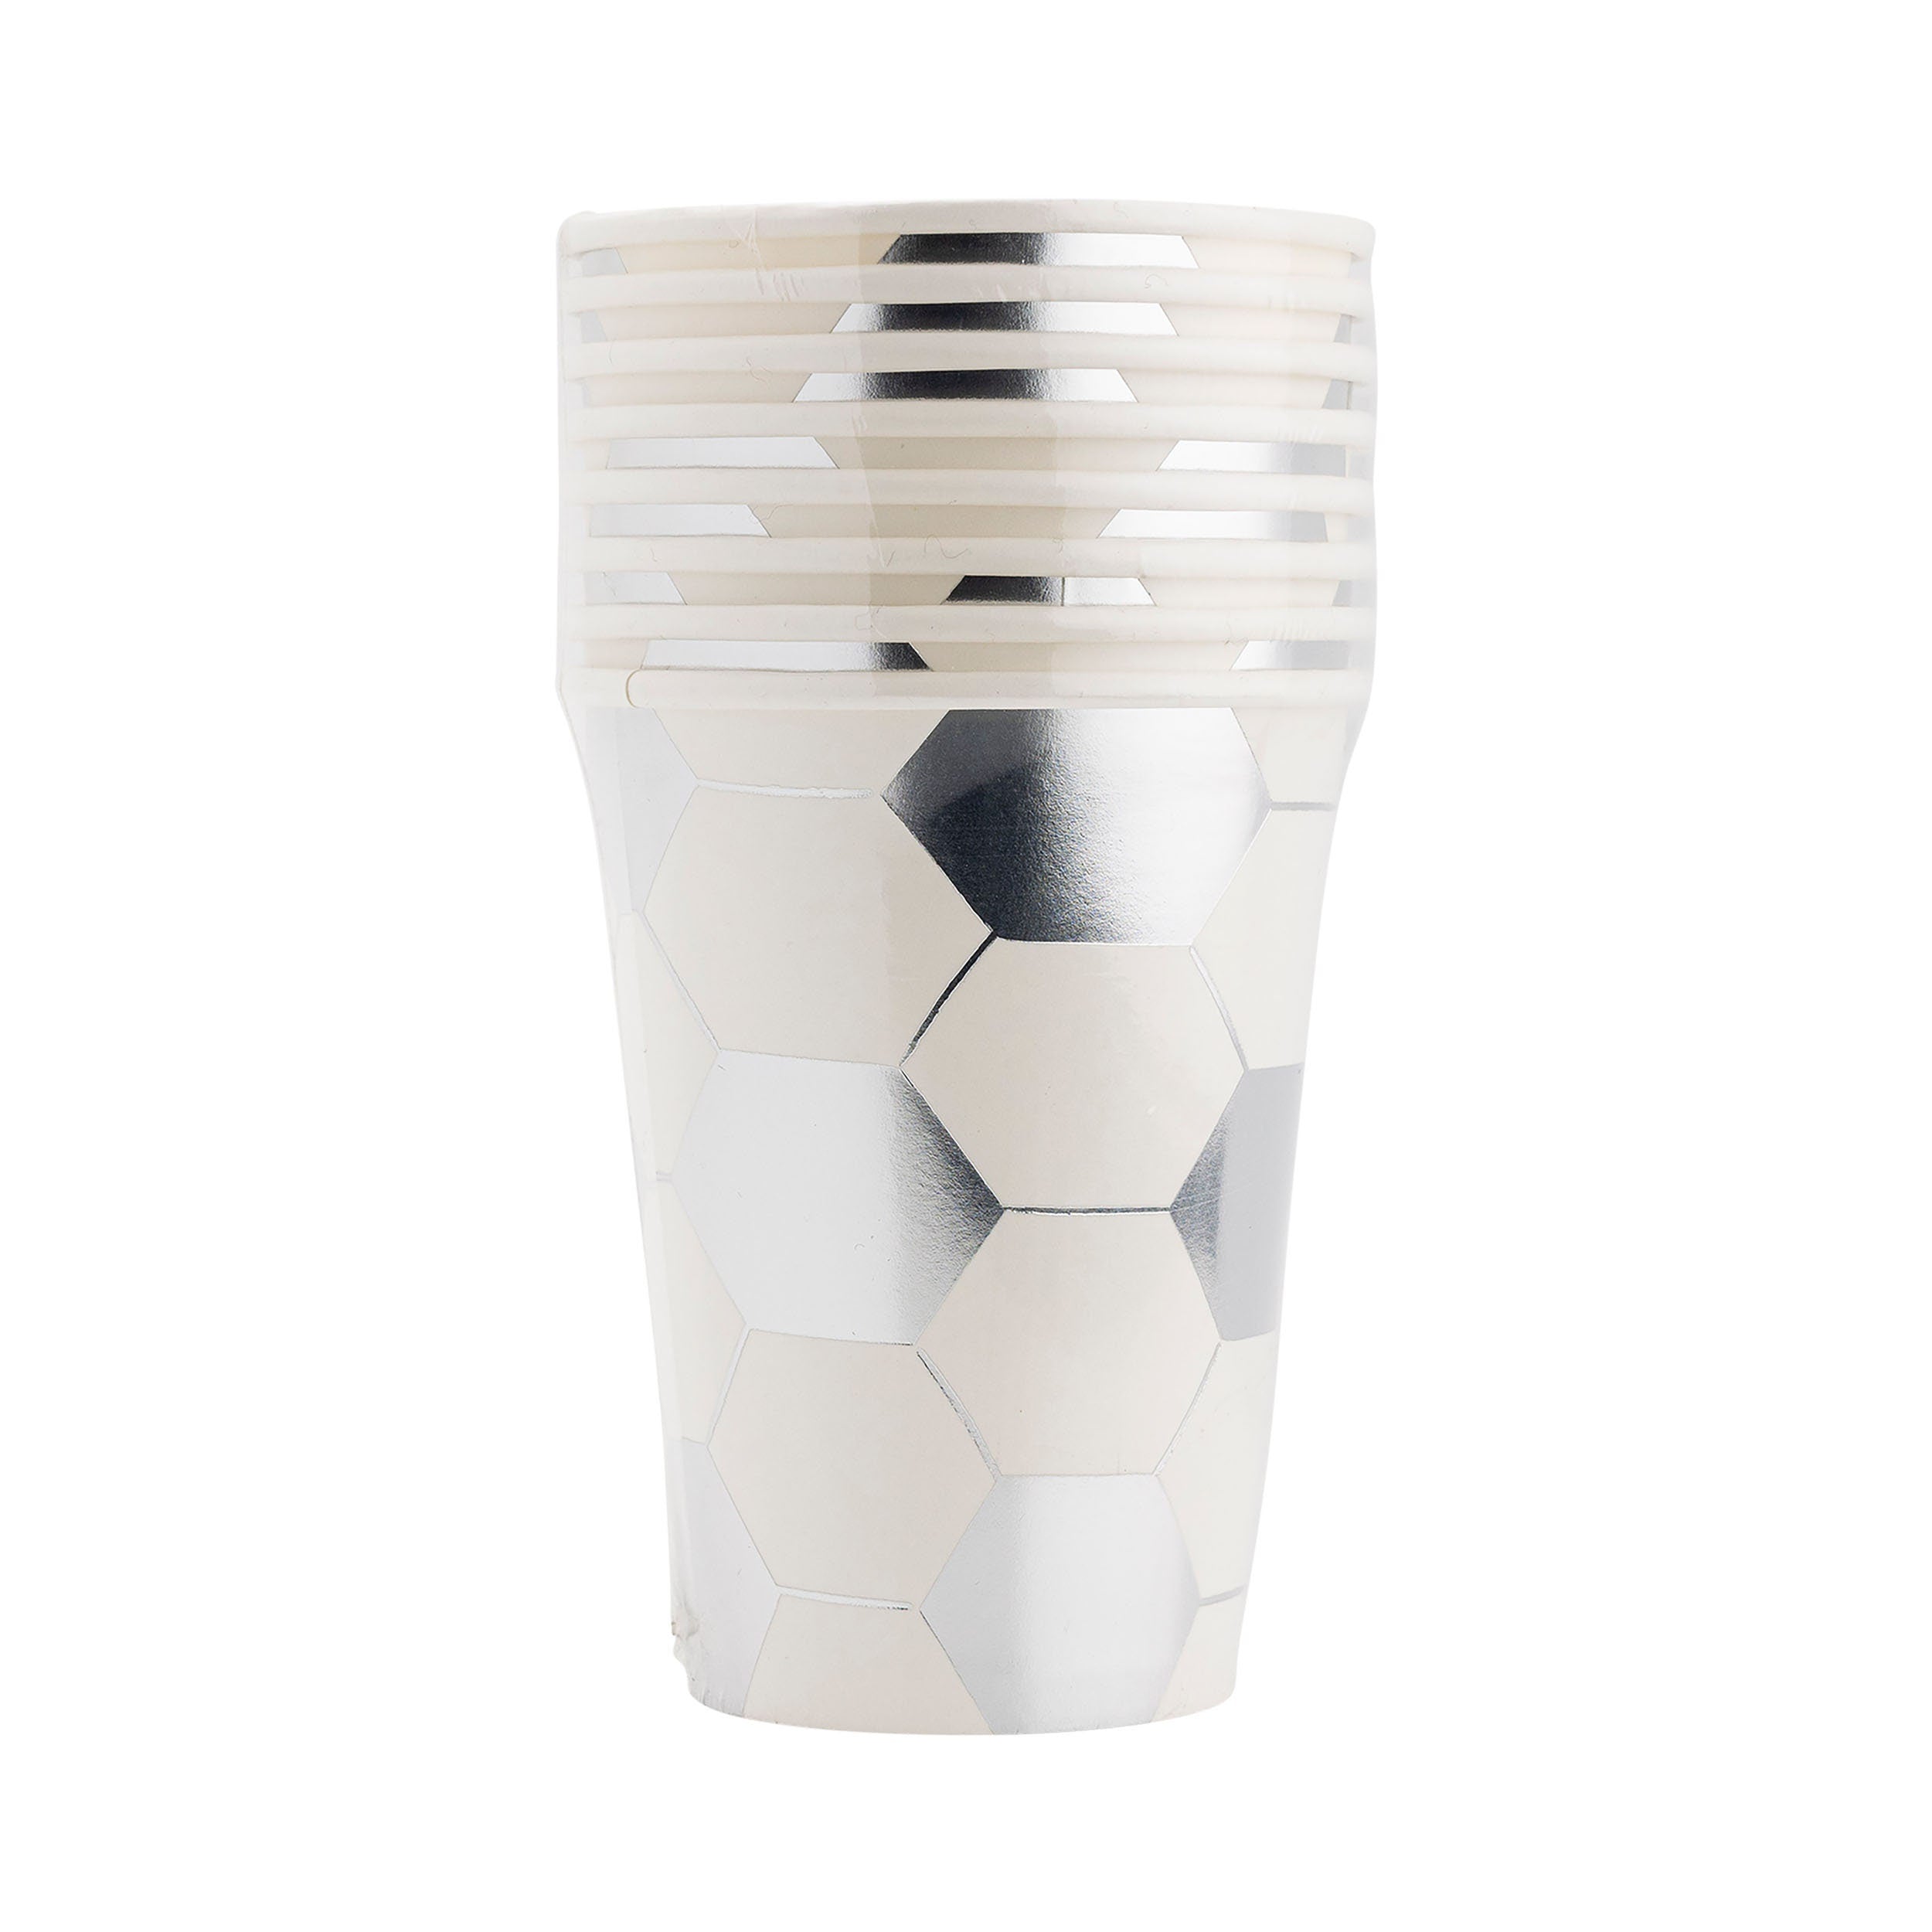 Soccer Party Paper Cups - They look like a soccer ball with silver foil